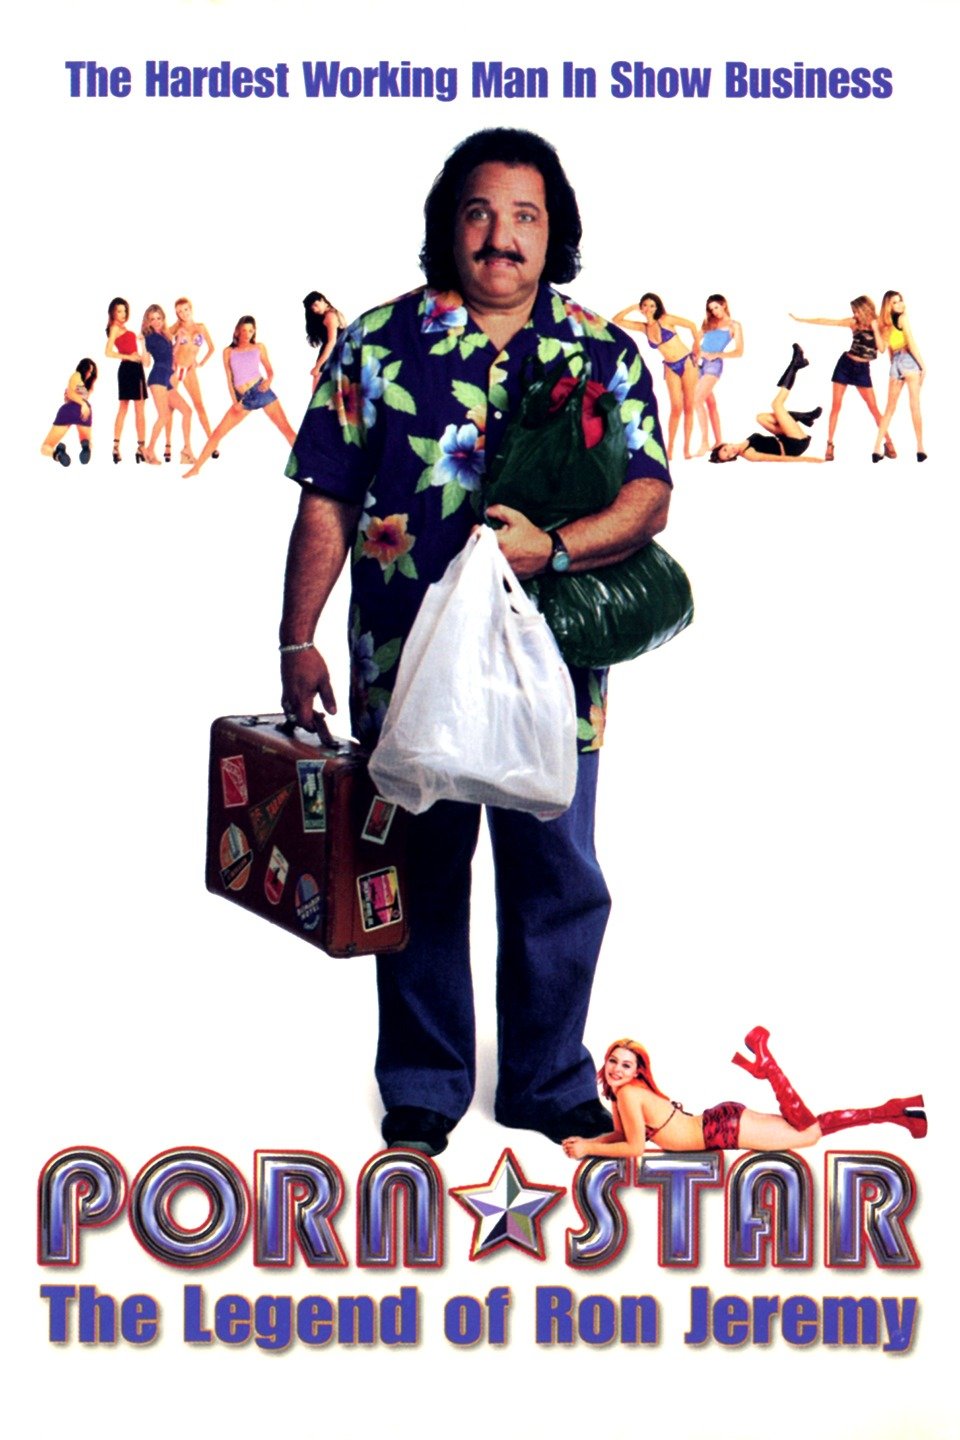 5porn Star Movies - Porn Star: The Legend of Ron Jeremy - Rotten Tomatoes